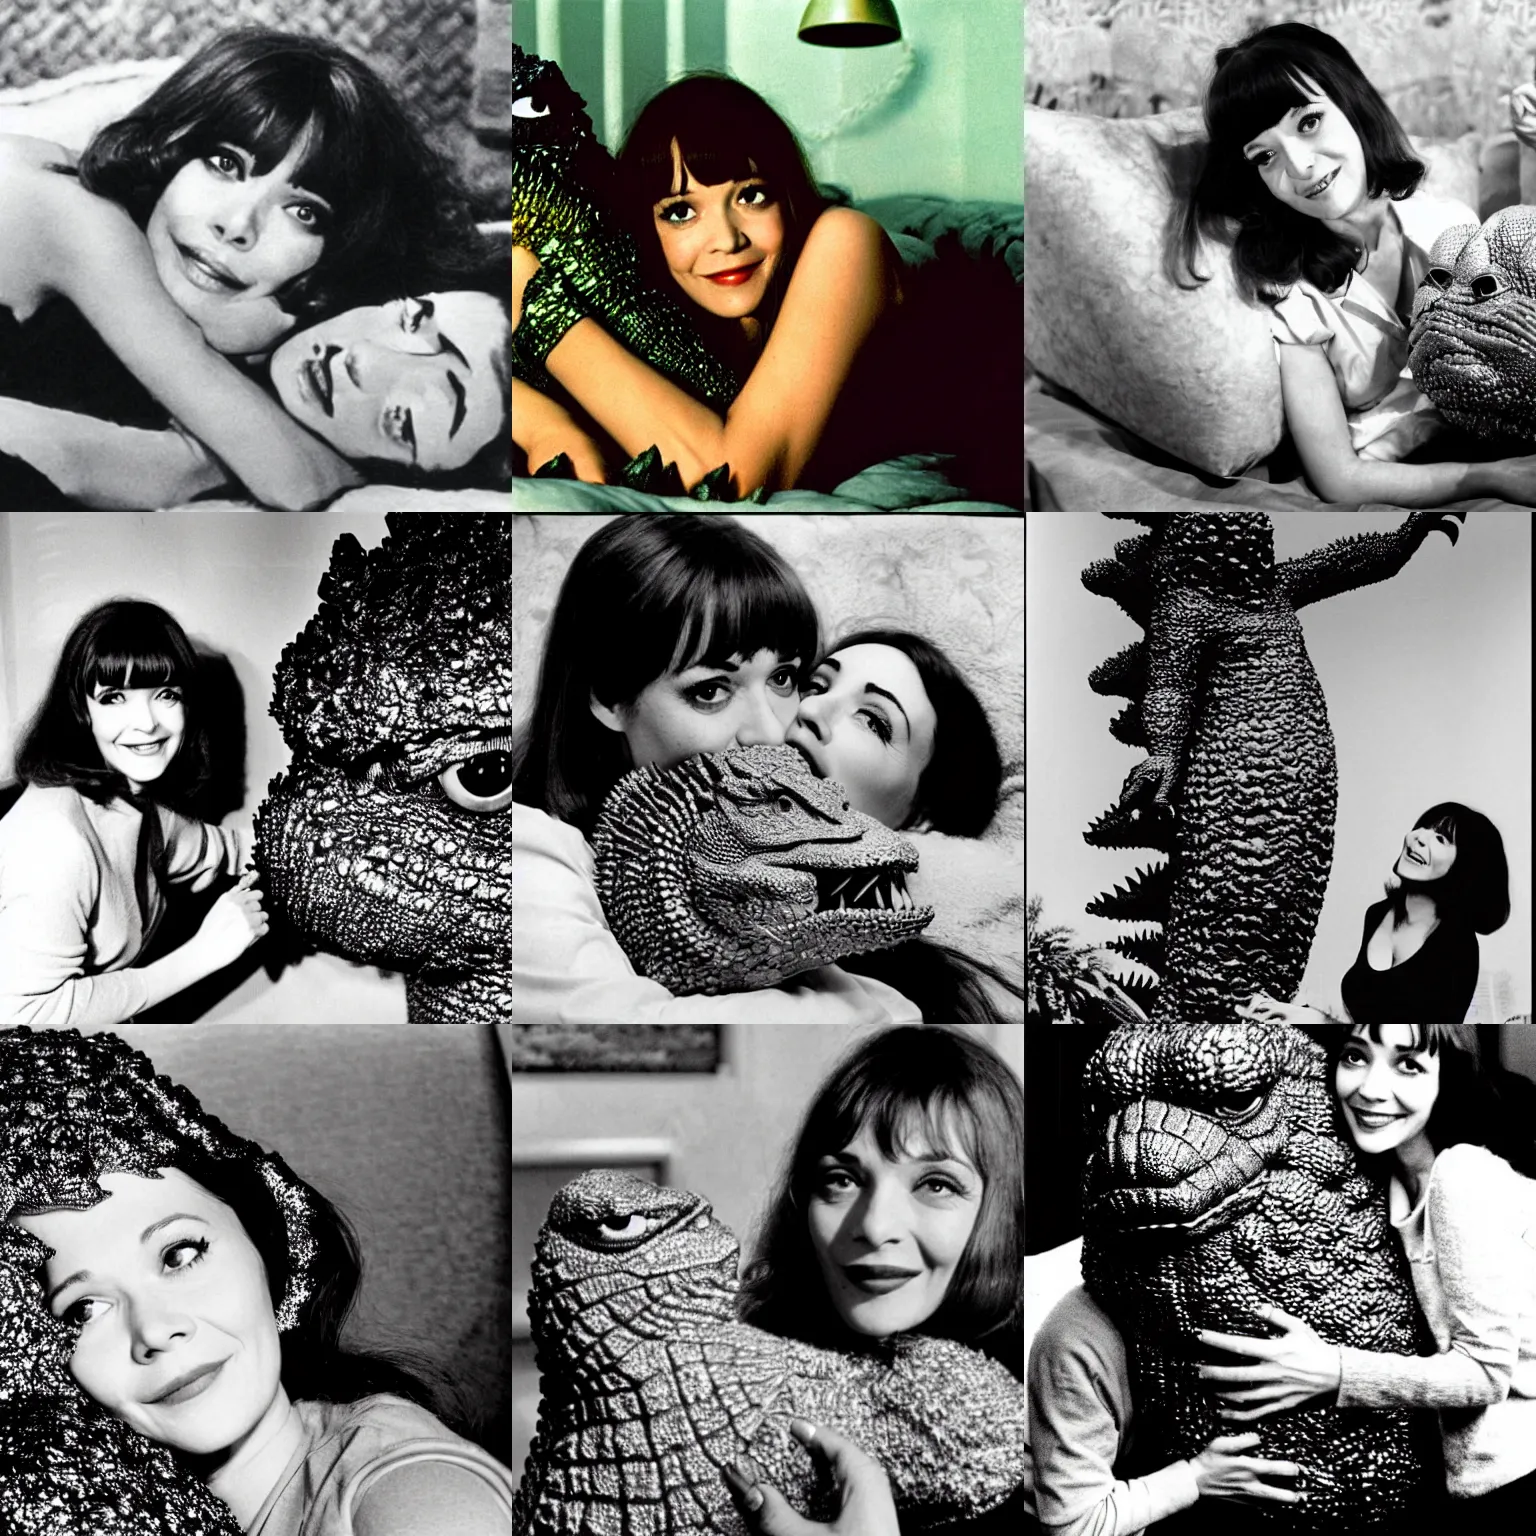 Prompt: anna karina in a bed with godzilla. godzilla is a big monster with scales. close up of anna karina cuddling the very large head of godzilla with scales